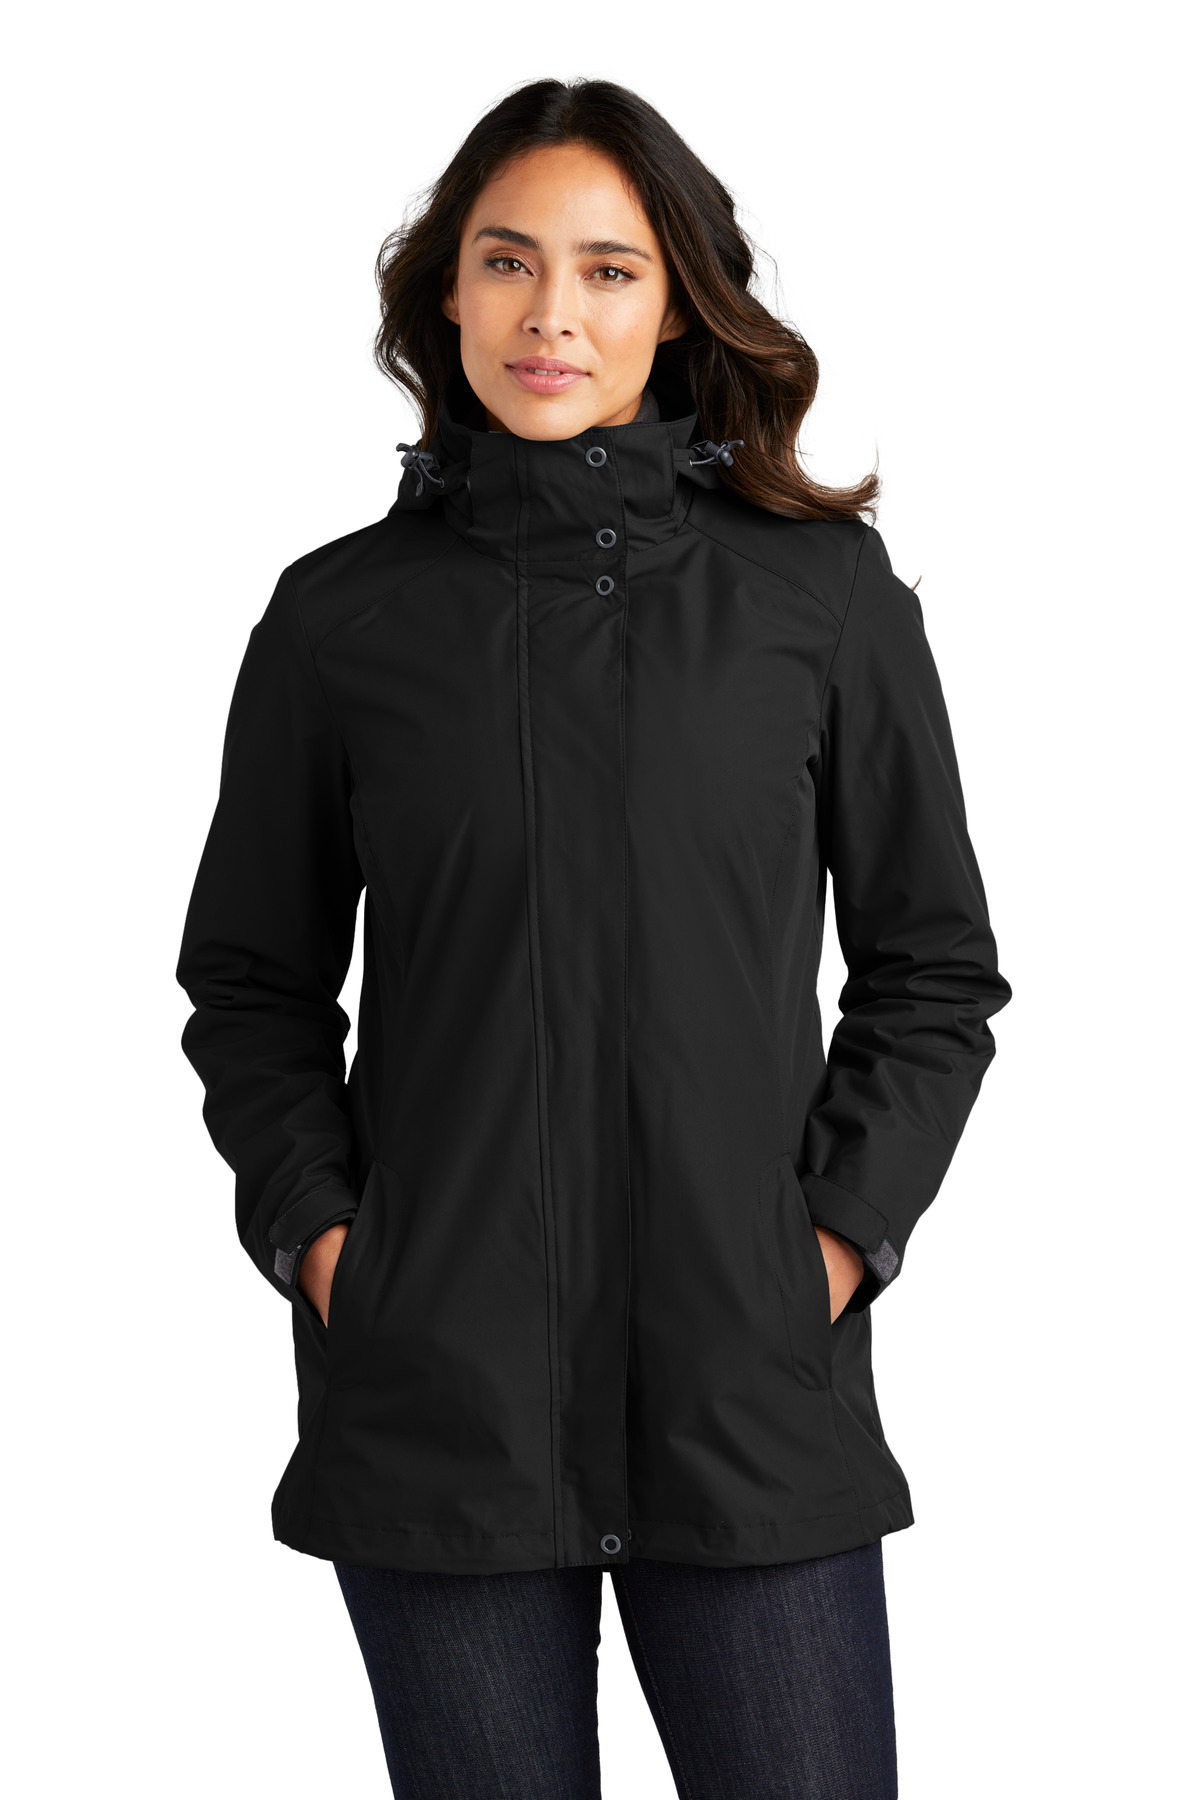 Port Authority Ladies All-Weather 3-in-1 Jacket-Port Authority